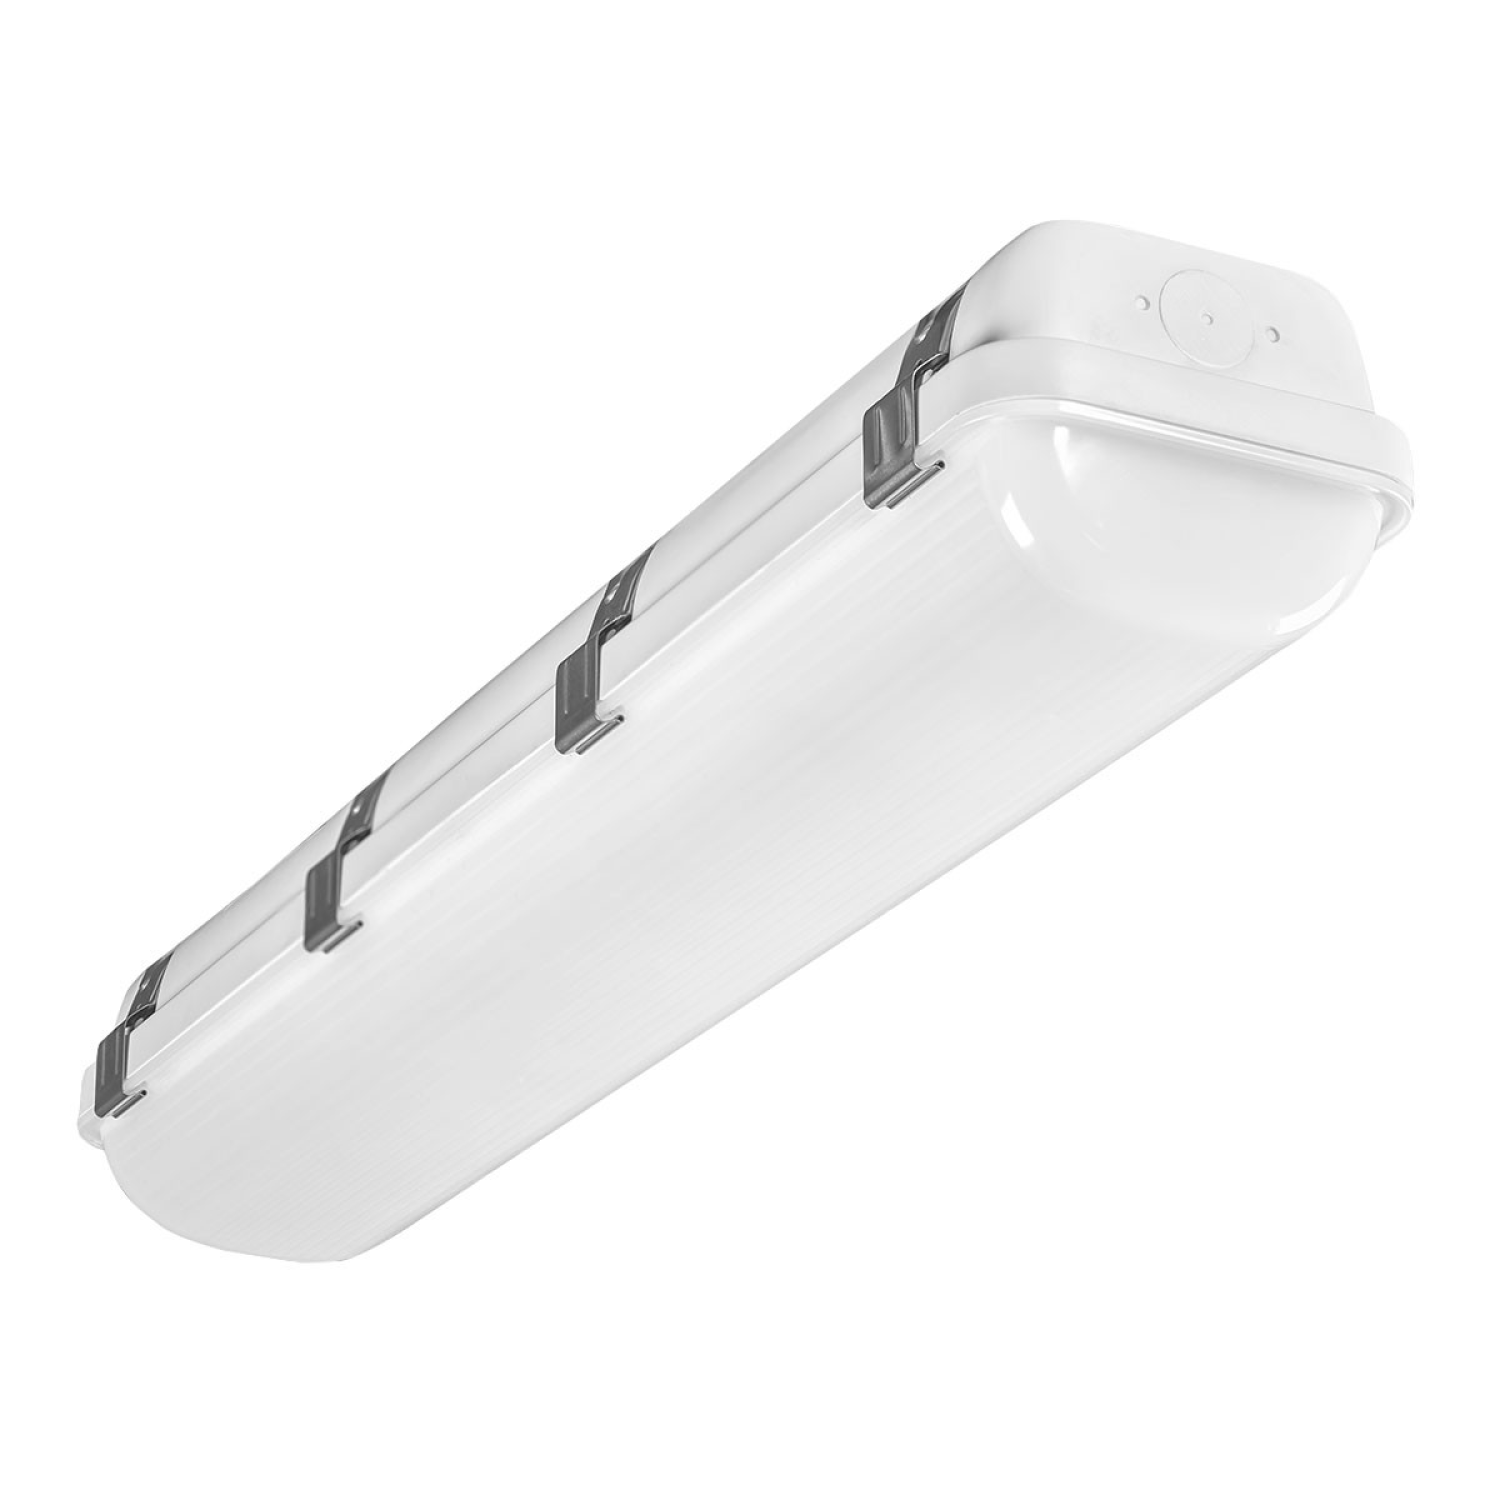 2ft LED Vapor Tight Fixture, 20W/25W/30W, Selectable Wattage and CCT, 4000 Lumens